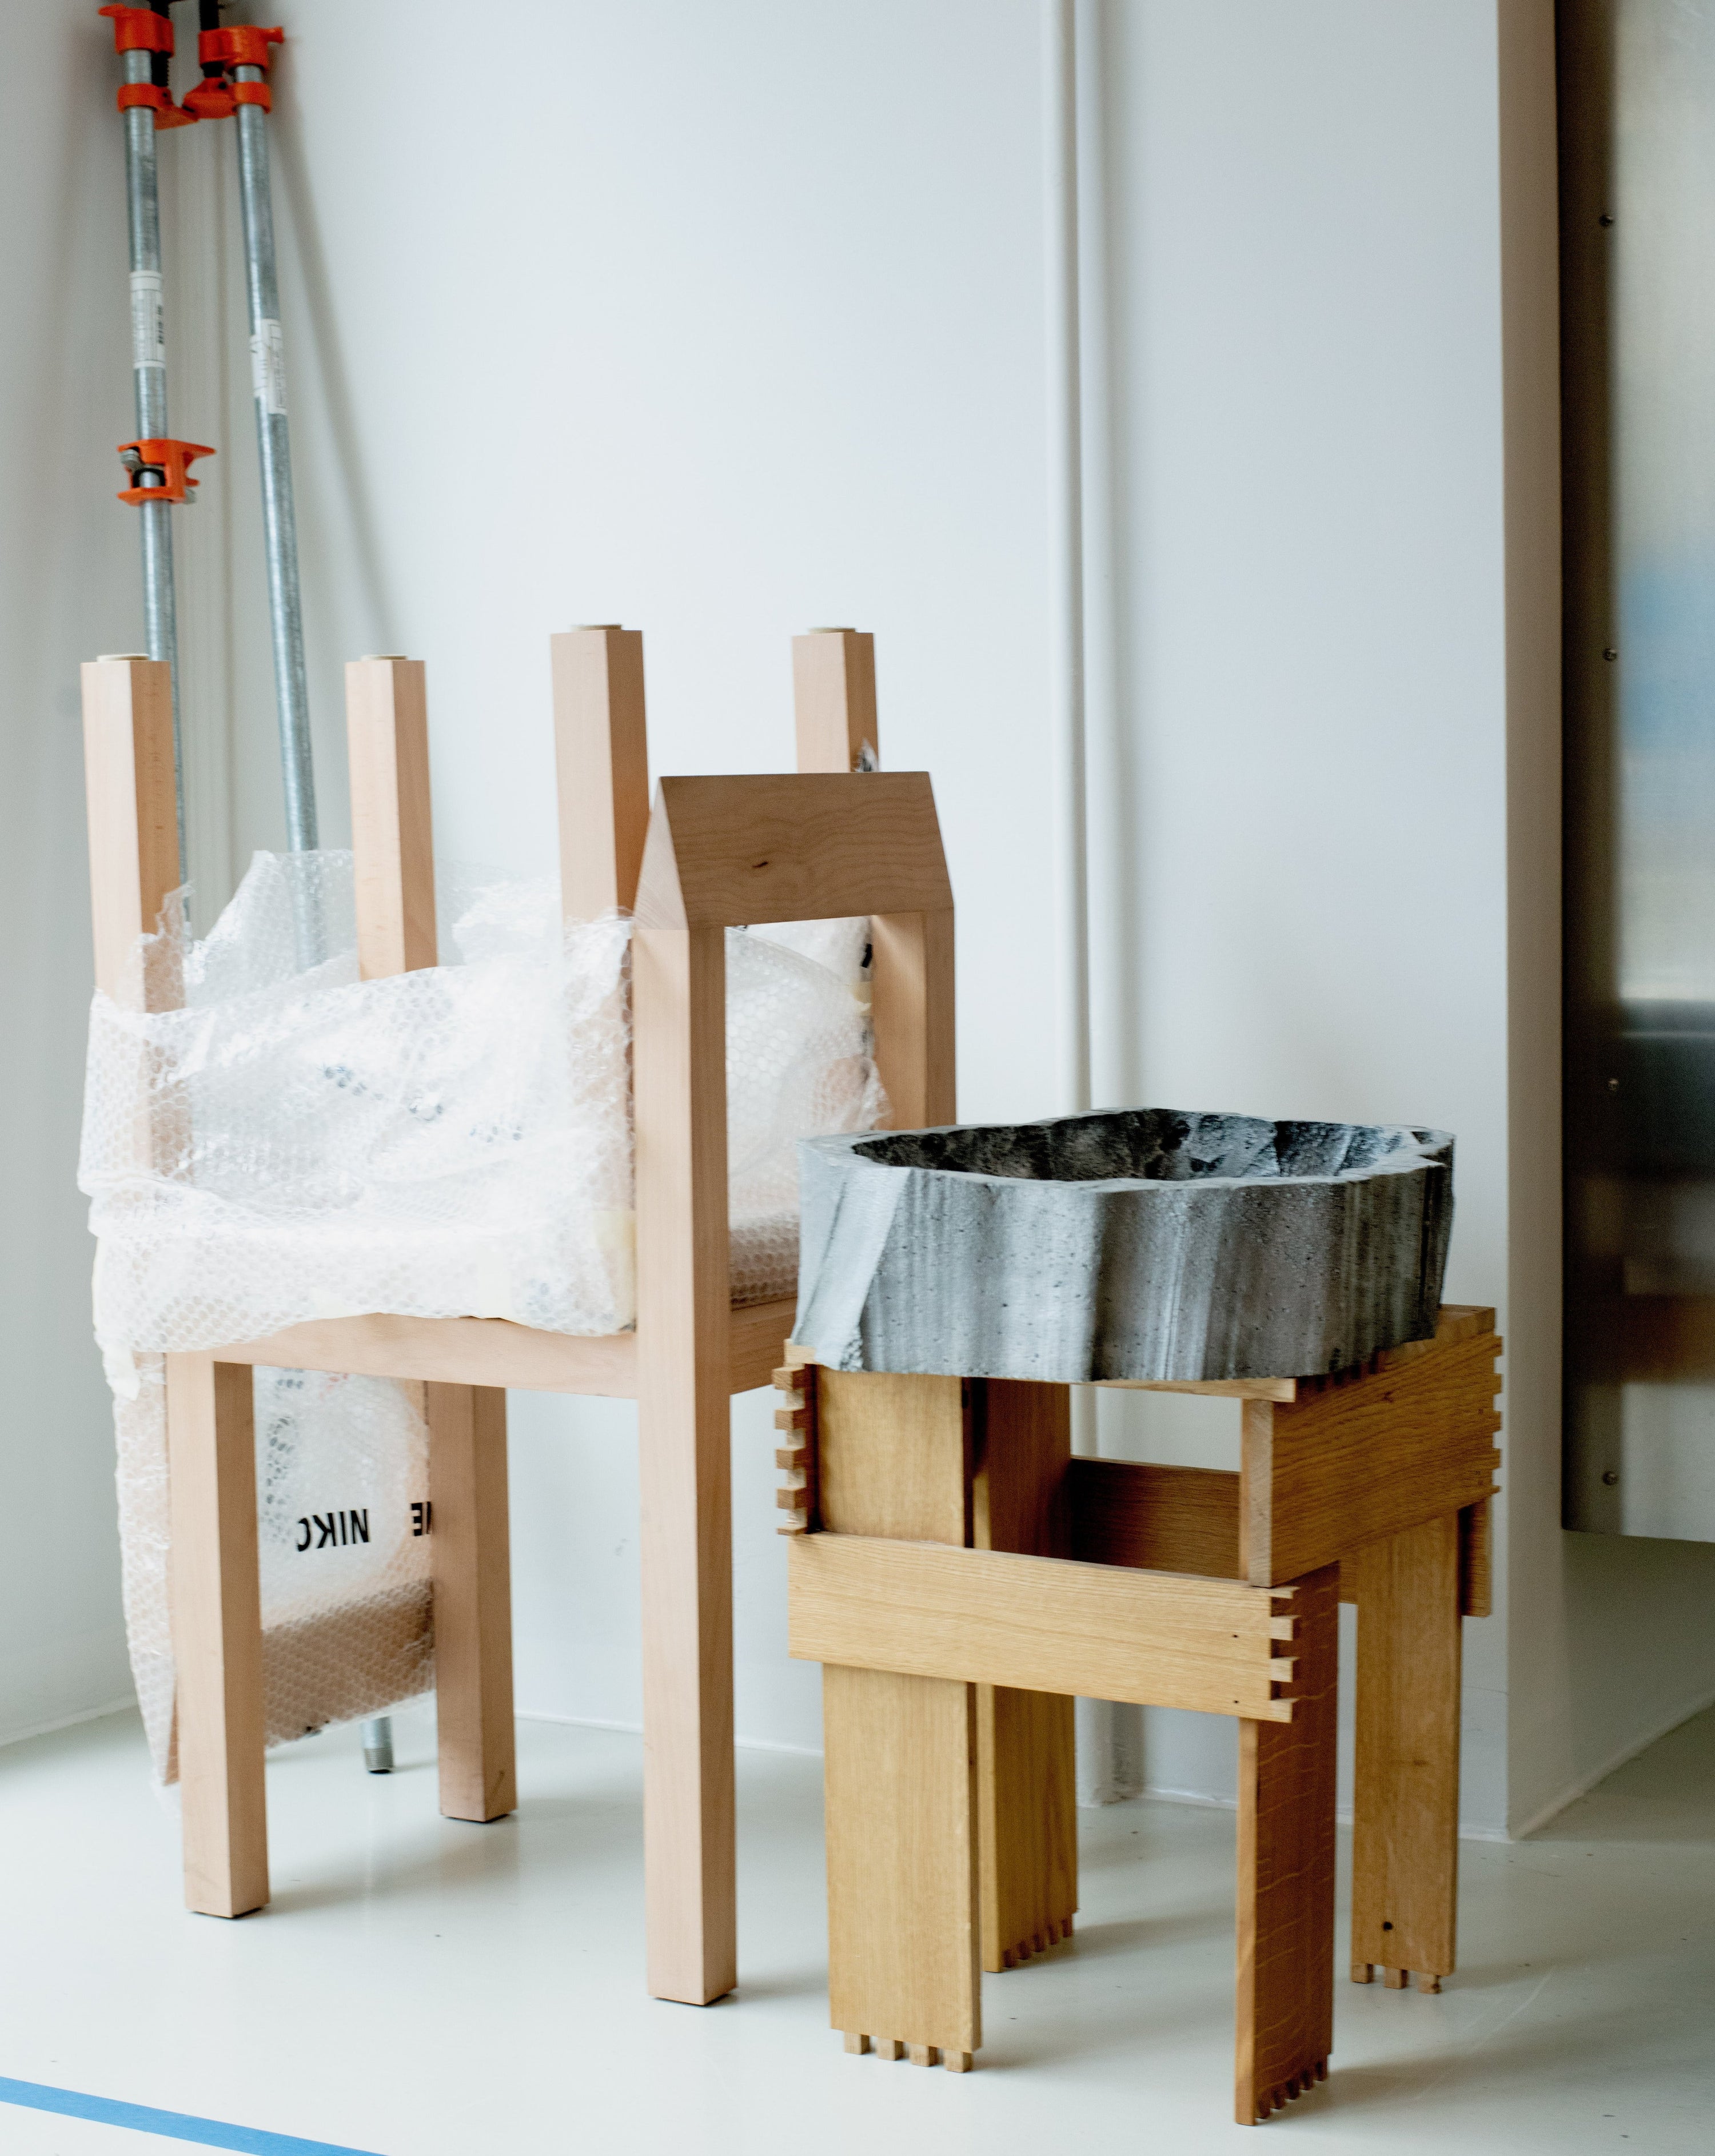 Scooped bucket object handmade by NIKO JUNE on wooden chair